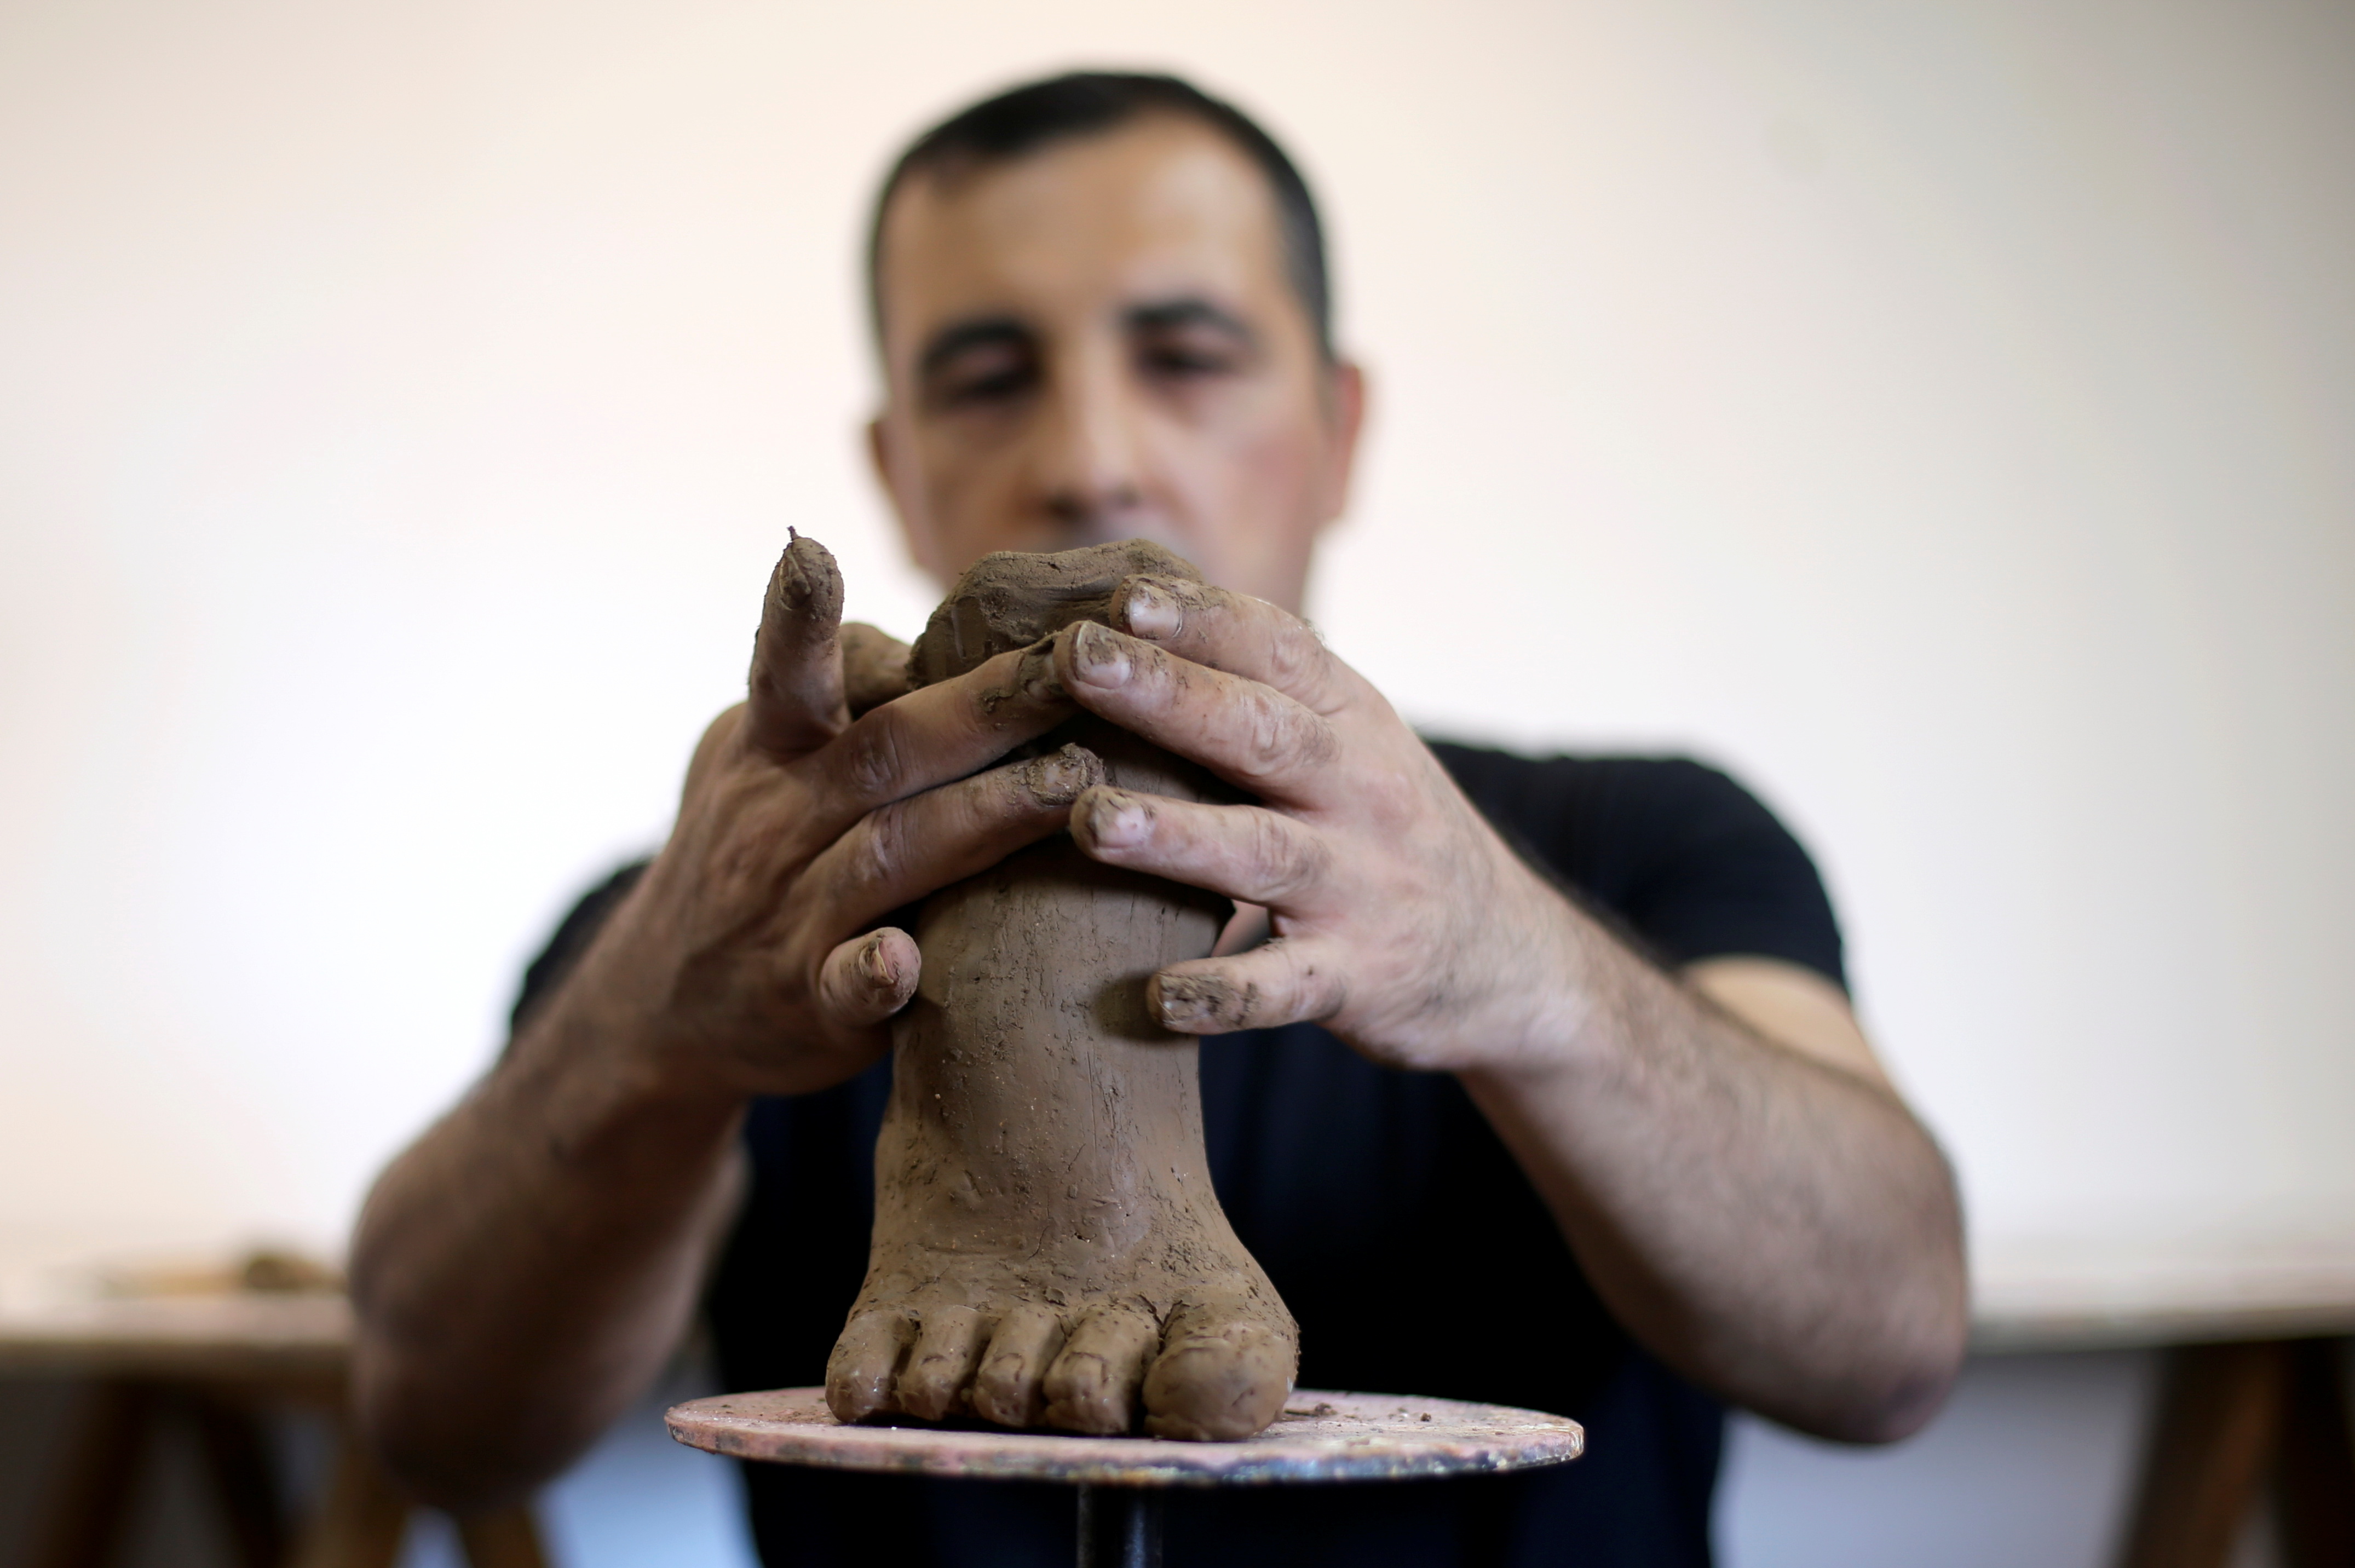 Artist makes lost limbs art in a Gaza gallery